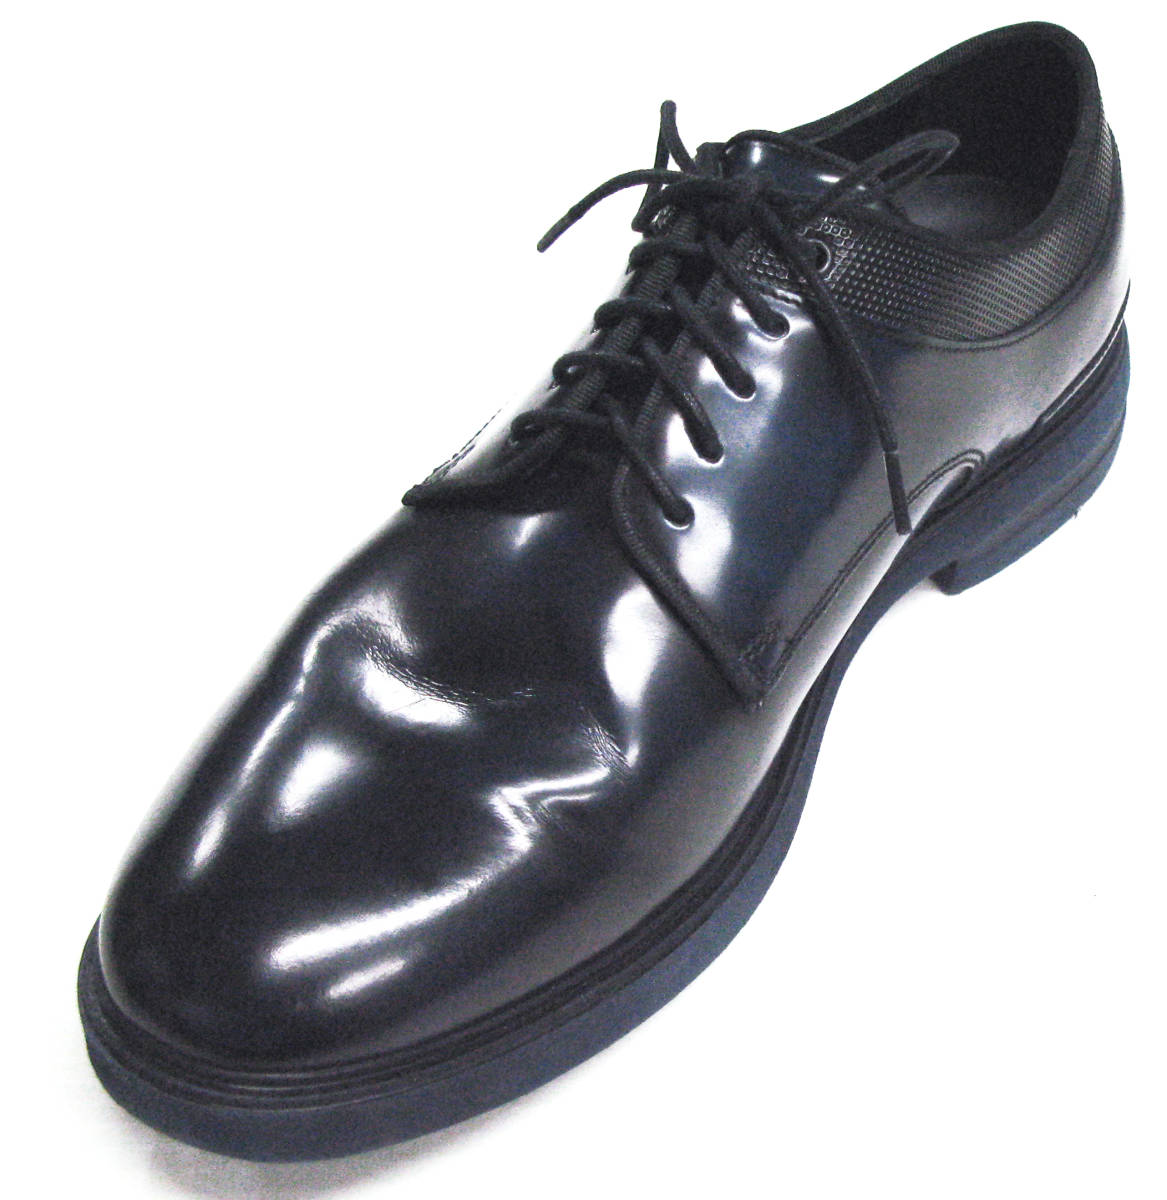 LANVIN COLLECTION ： 青/黒 ムラペイント レザー シューズ （ ランバン 靴 革靴 プレーントゥ LANVIN COLLECTION leather shoes_画像2